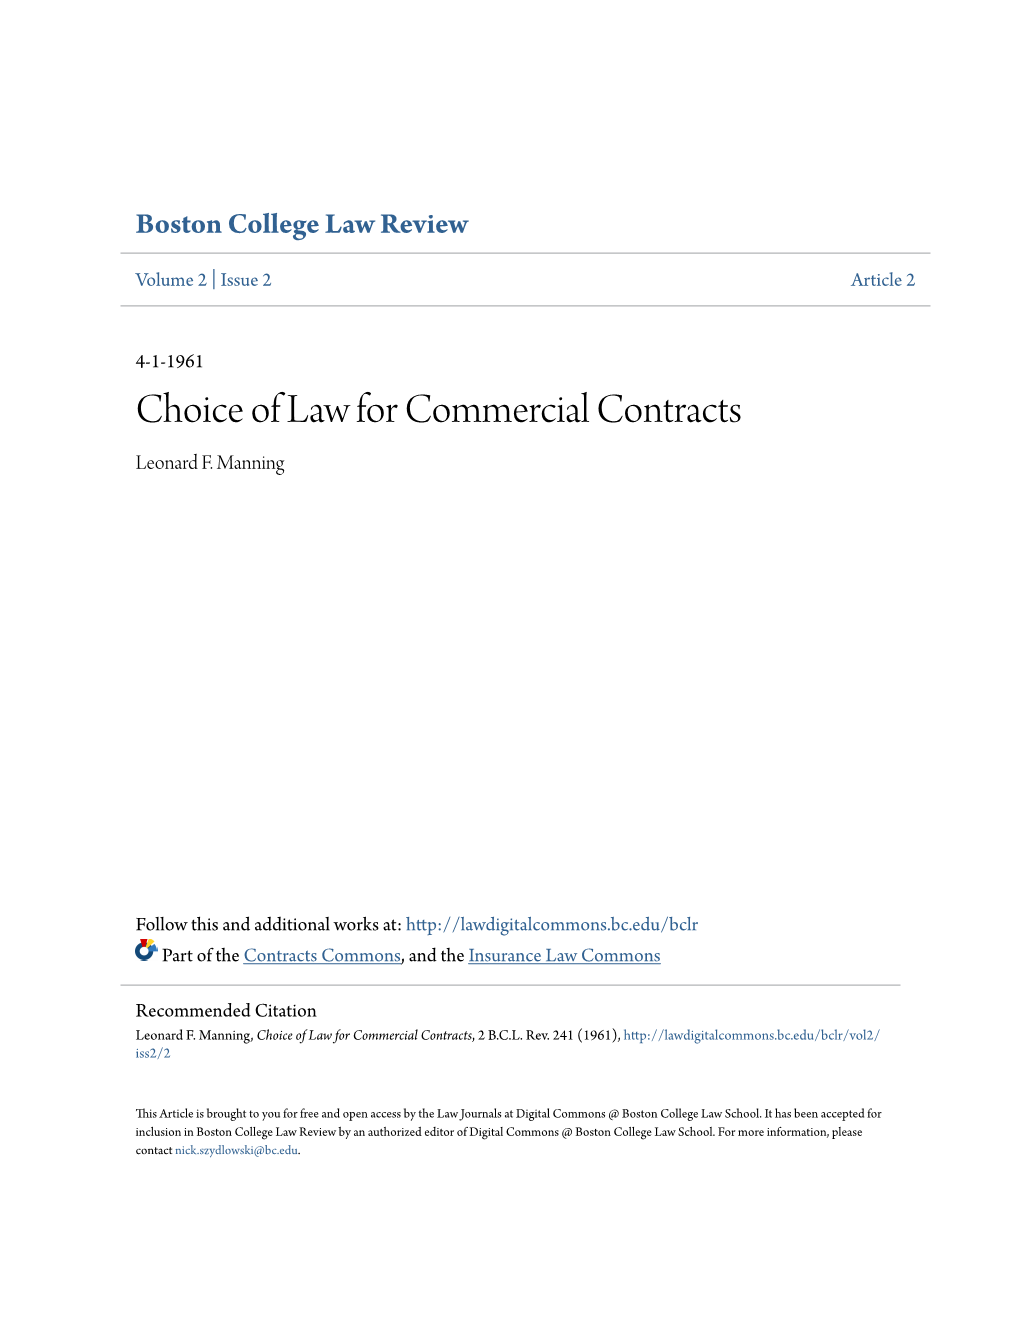 Choice of Law for Commercial Contracts Leonard F